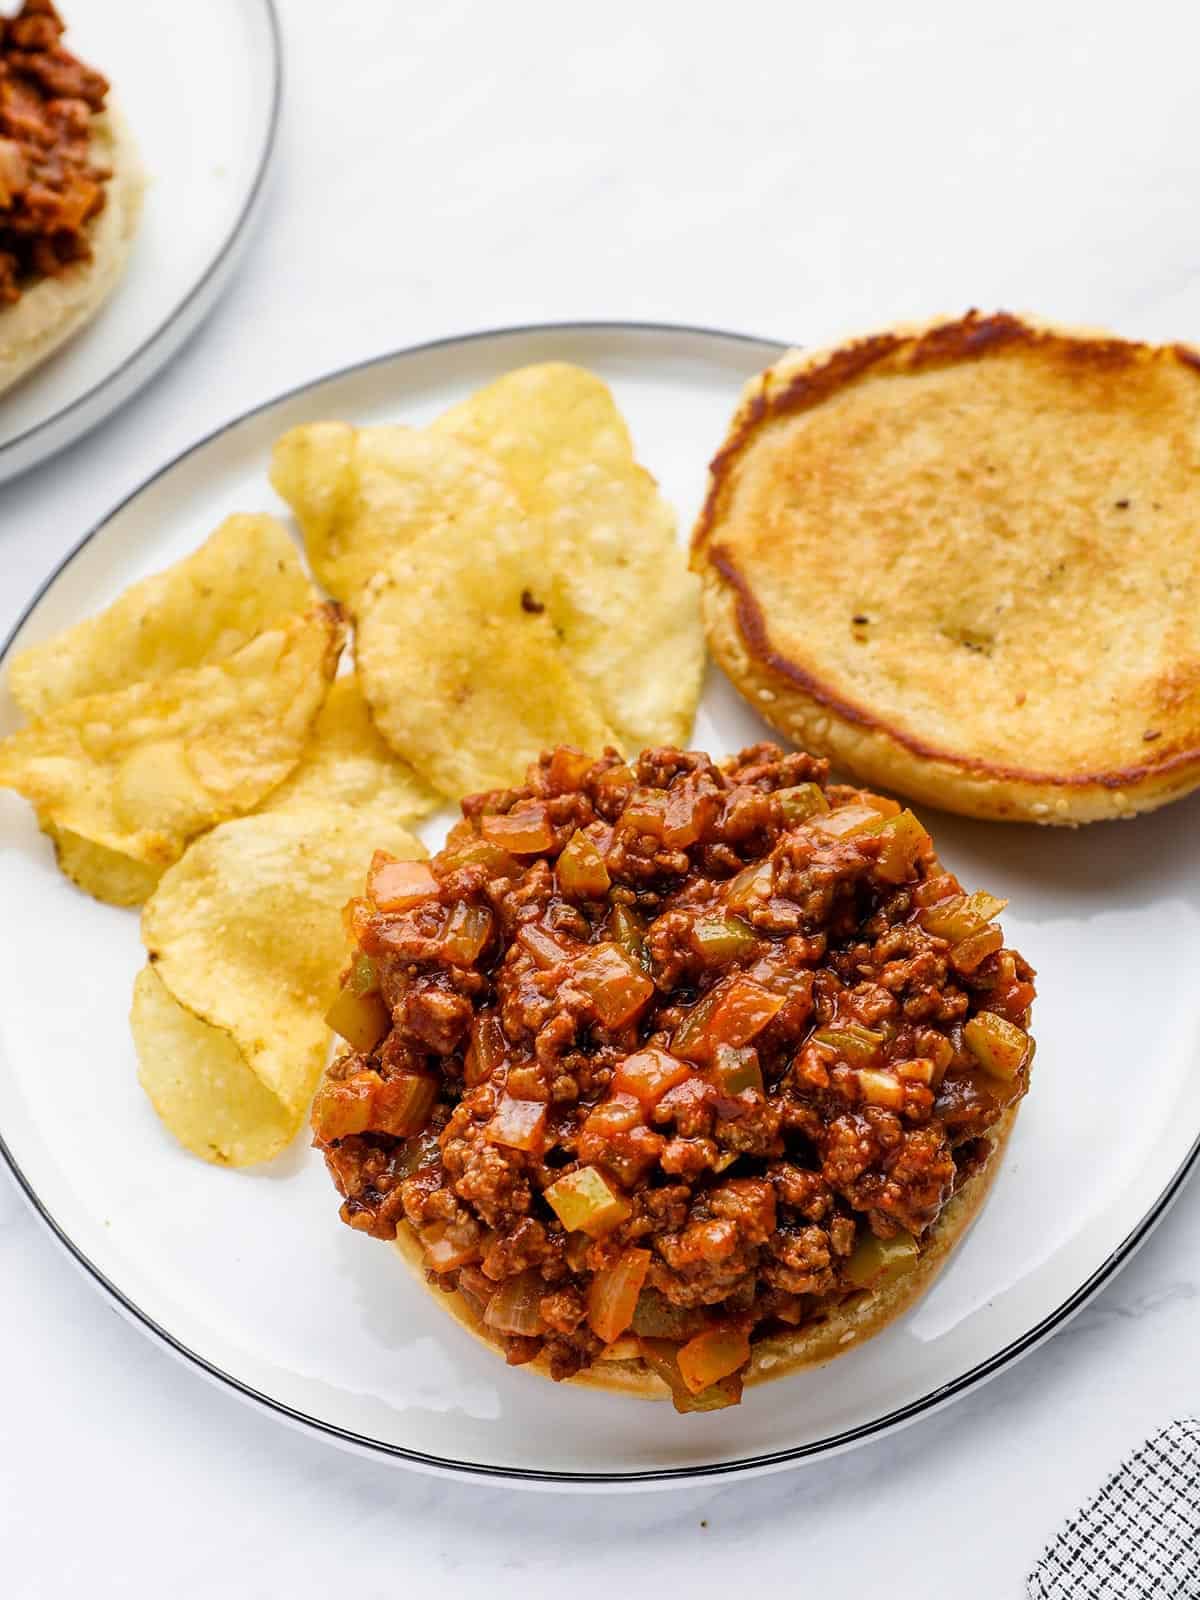 Open-faced sloppy joe on a plate with potato chips.